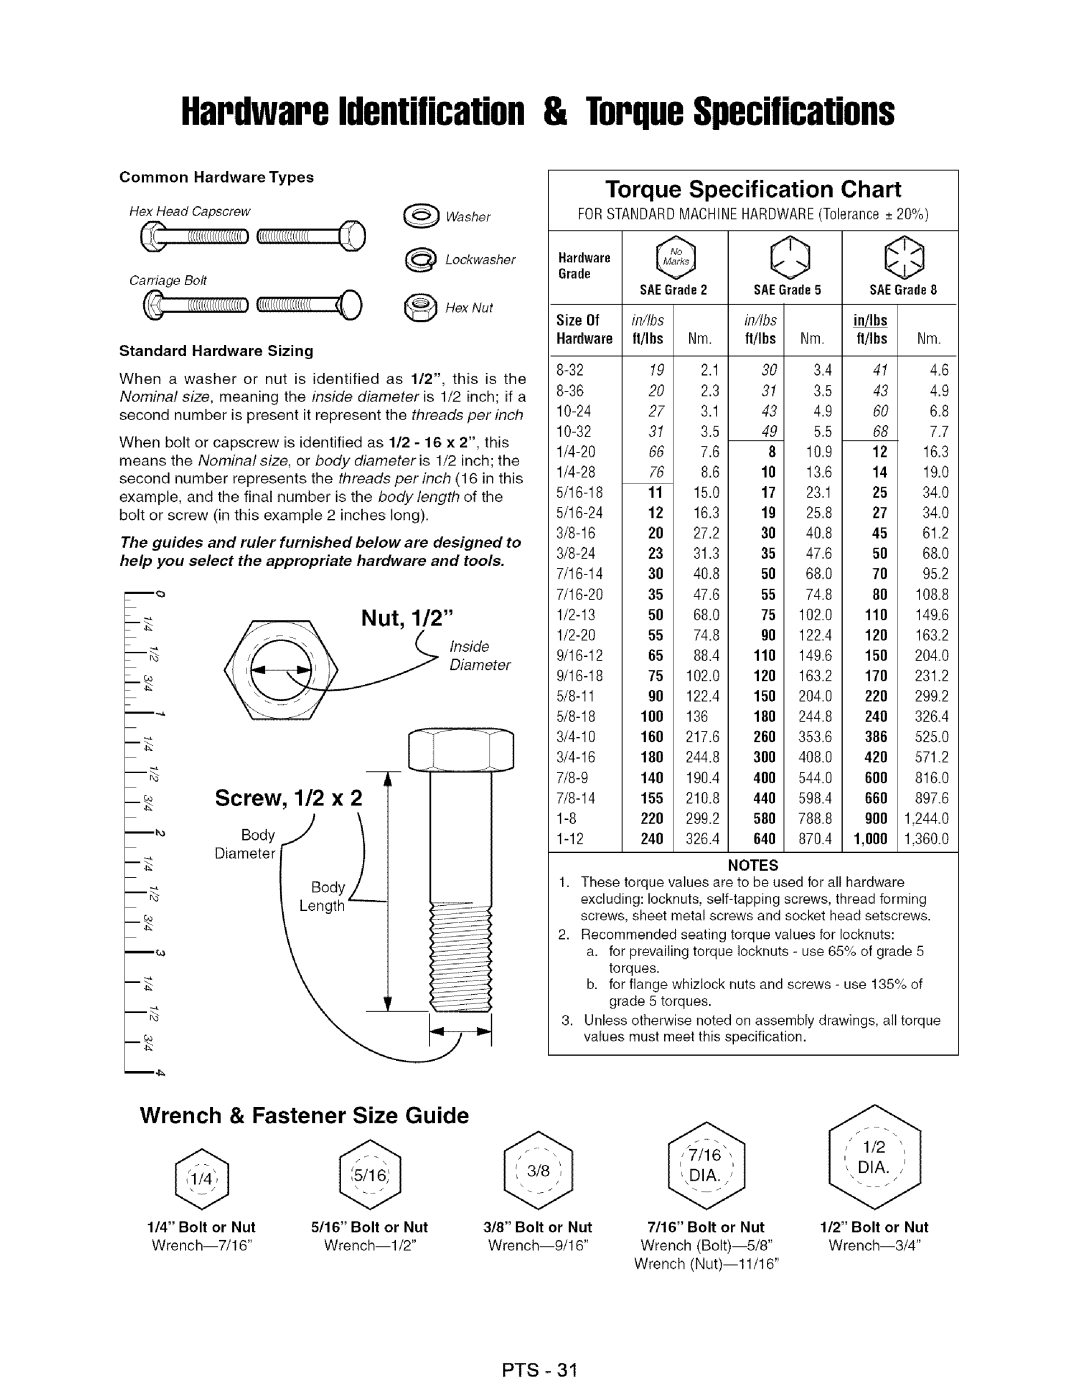 Craftsman 107.27768 Torque, Specification, Screw, 1/2x2, Wrench & Fastener Size Guide, Chart, in/Ibs, Hardware, ft/Ibs 